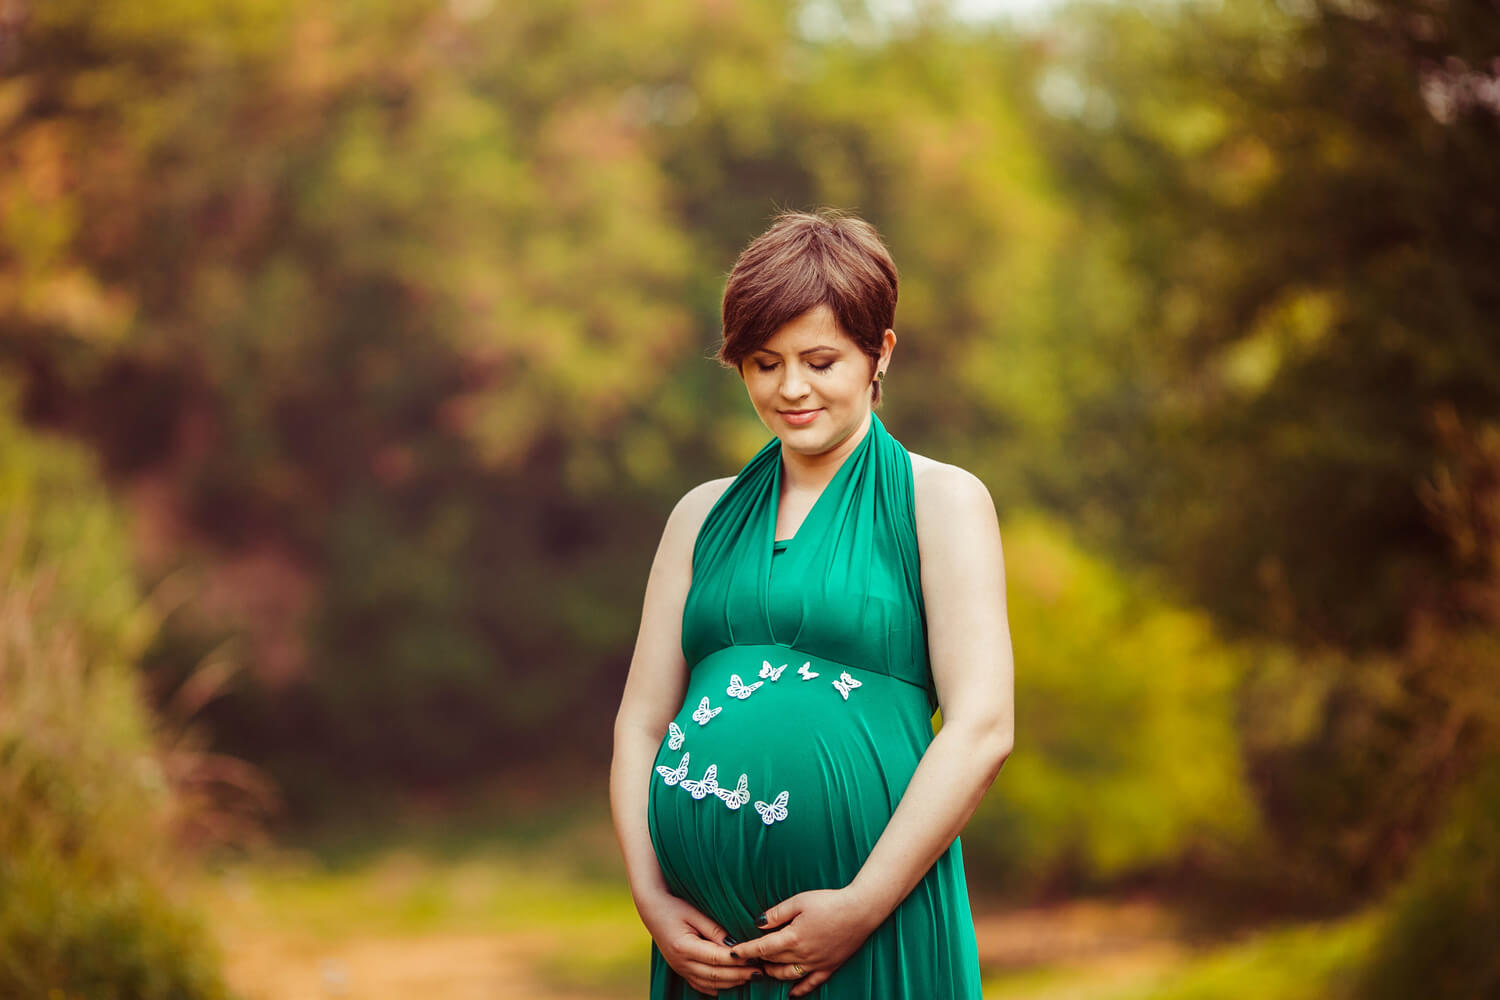 10 Tips To Have A Great Maternity Photo Shoots